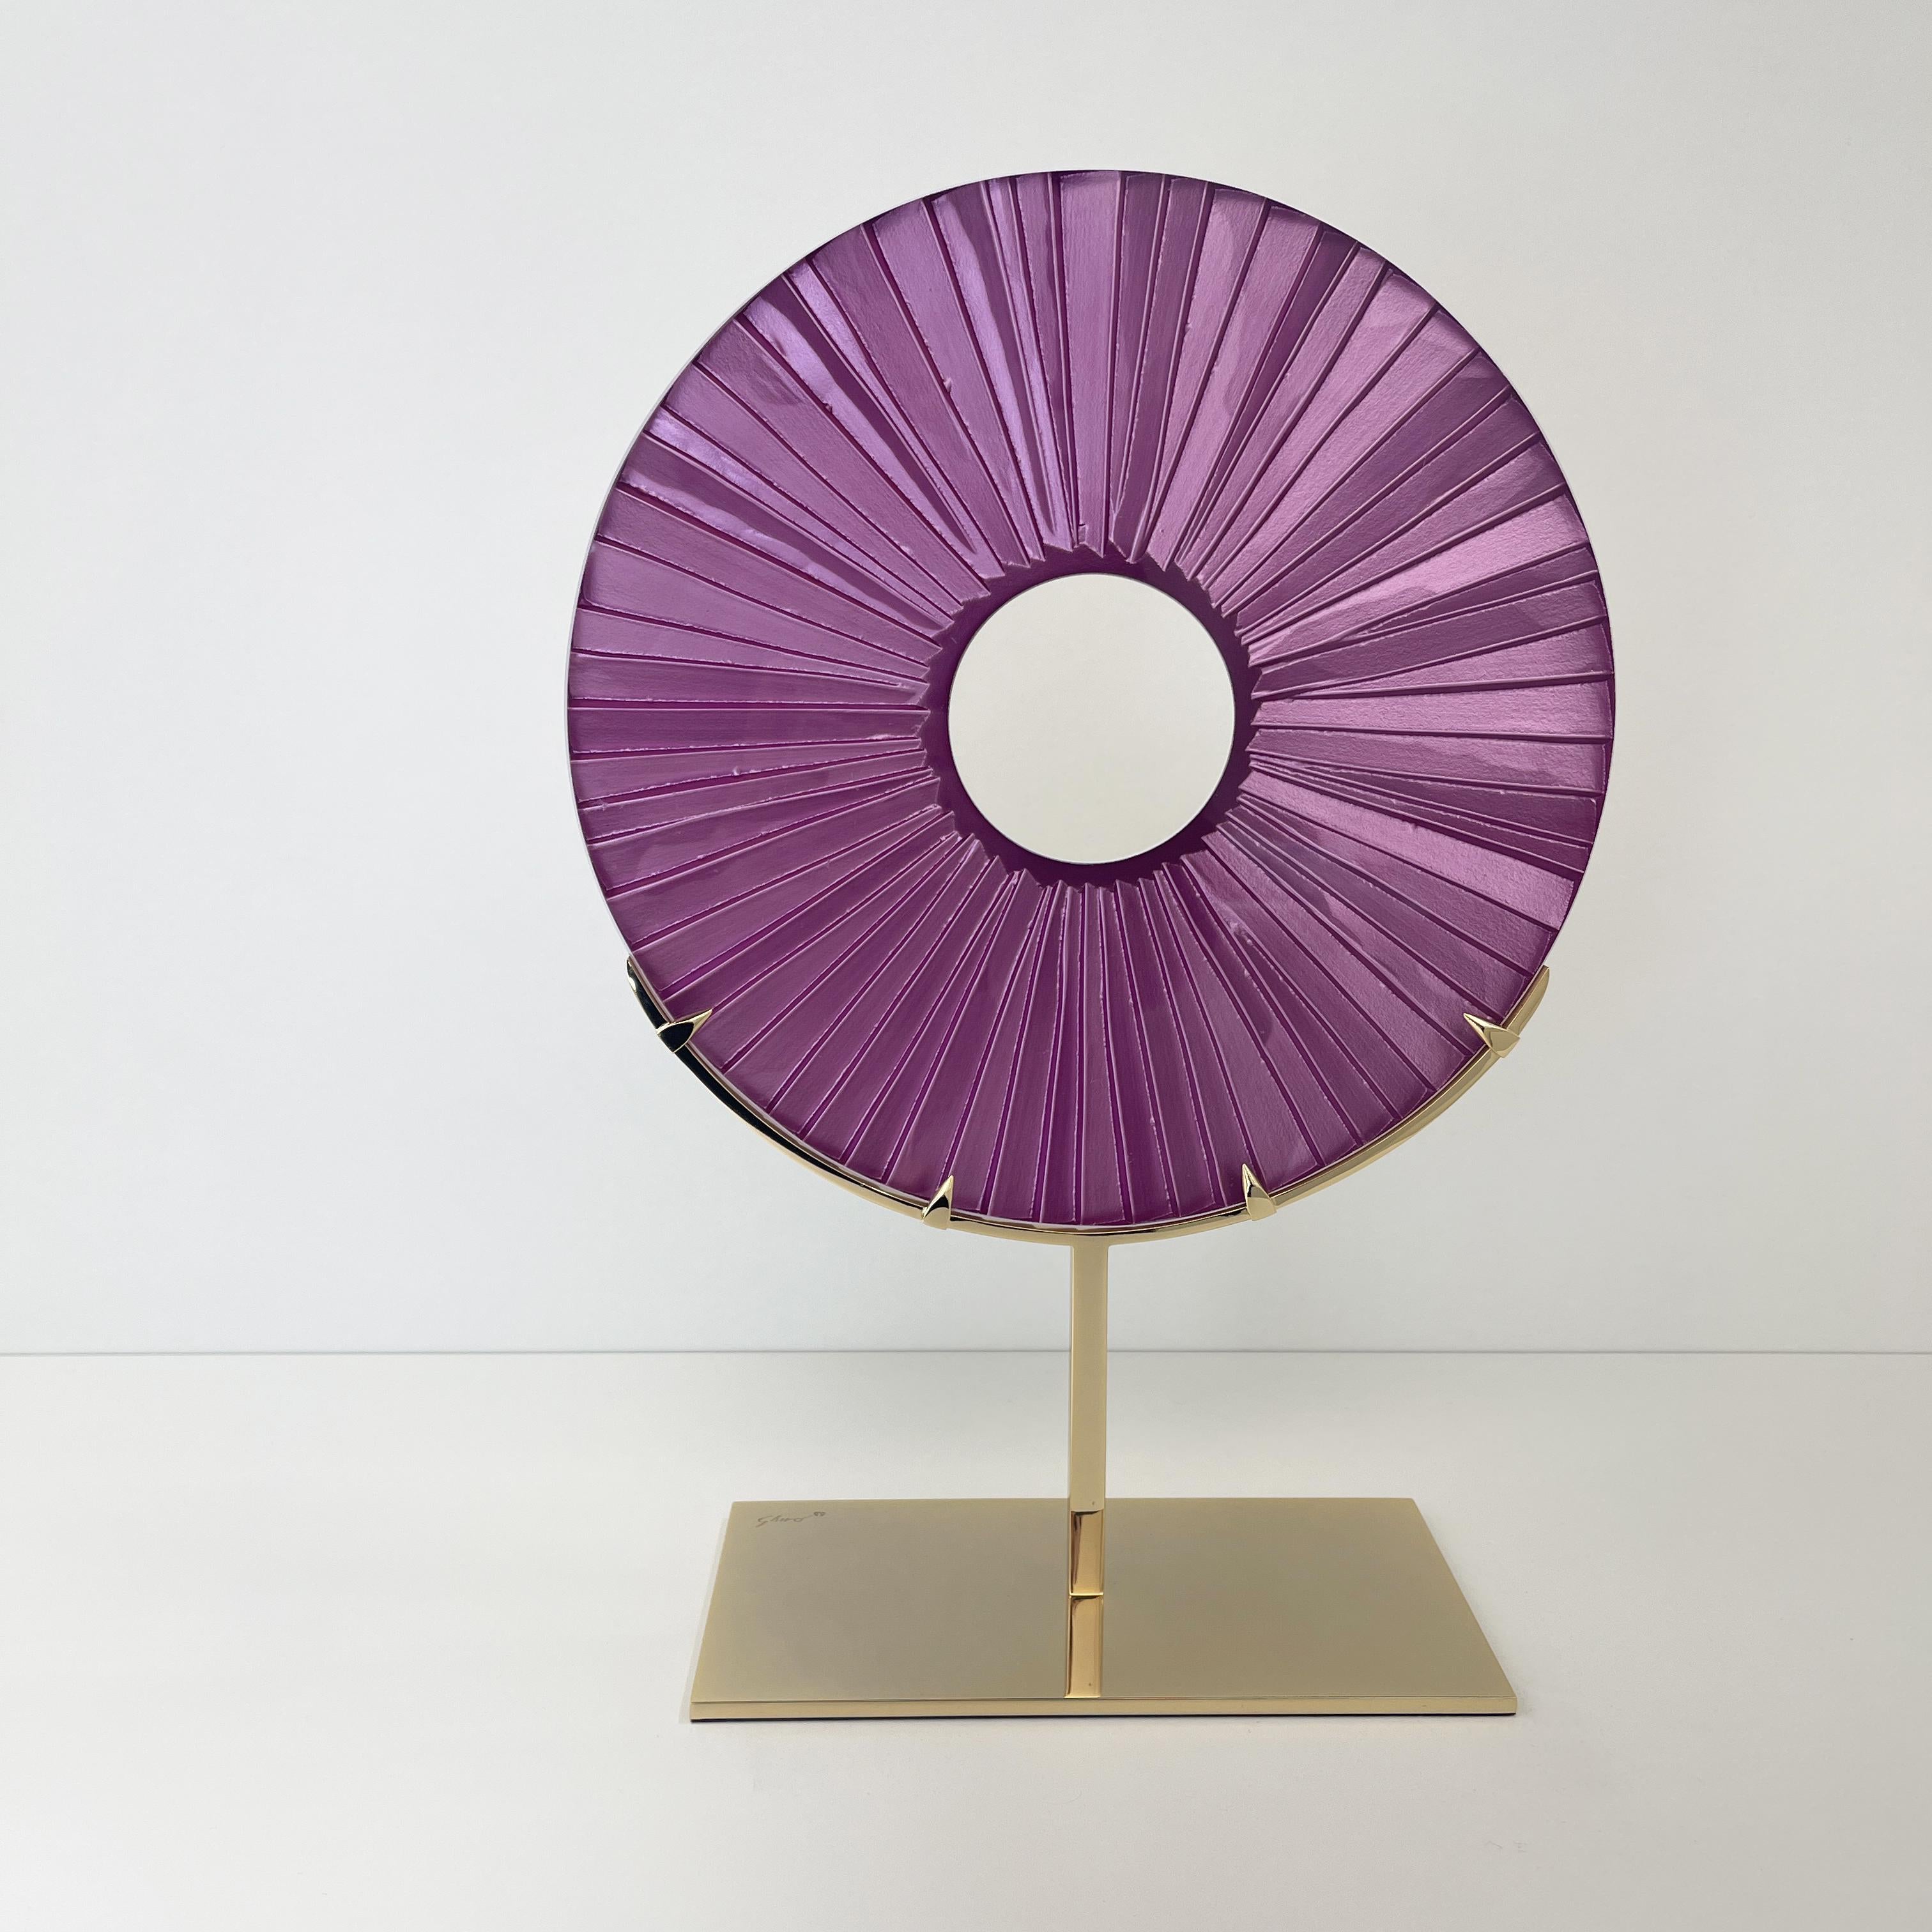 2023 Colletion of decorative objects by Ghiro Studio (Italy,Milan).
The 'Eye' is not only a luxury refined piece of furniture but it is also a hand carved sculpture designed to embellish with uniqueness, beauty and charming any living area or